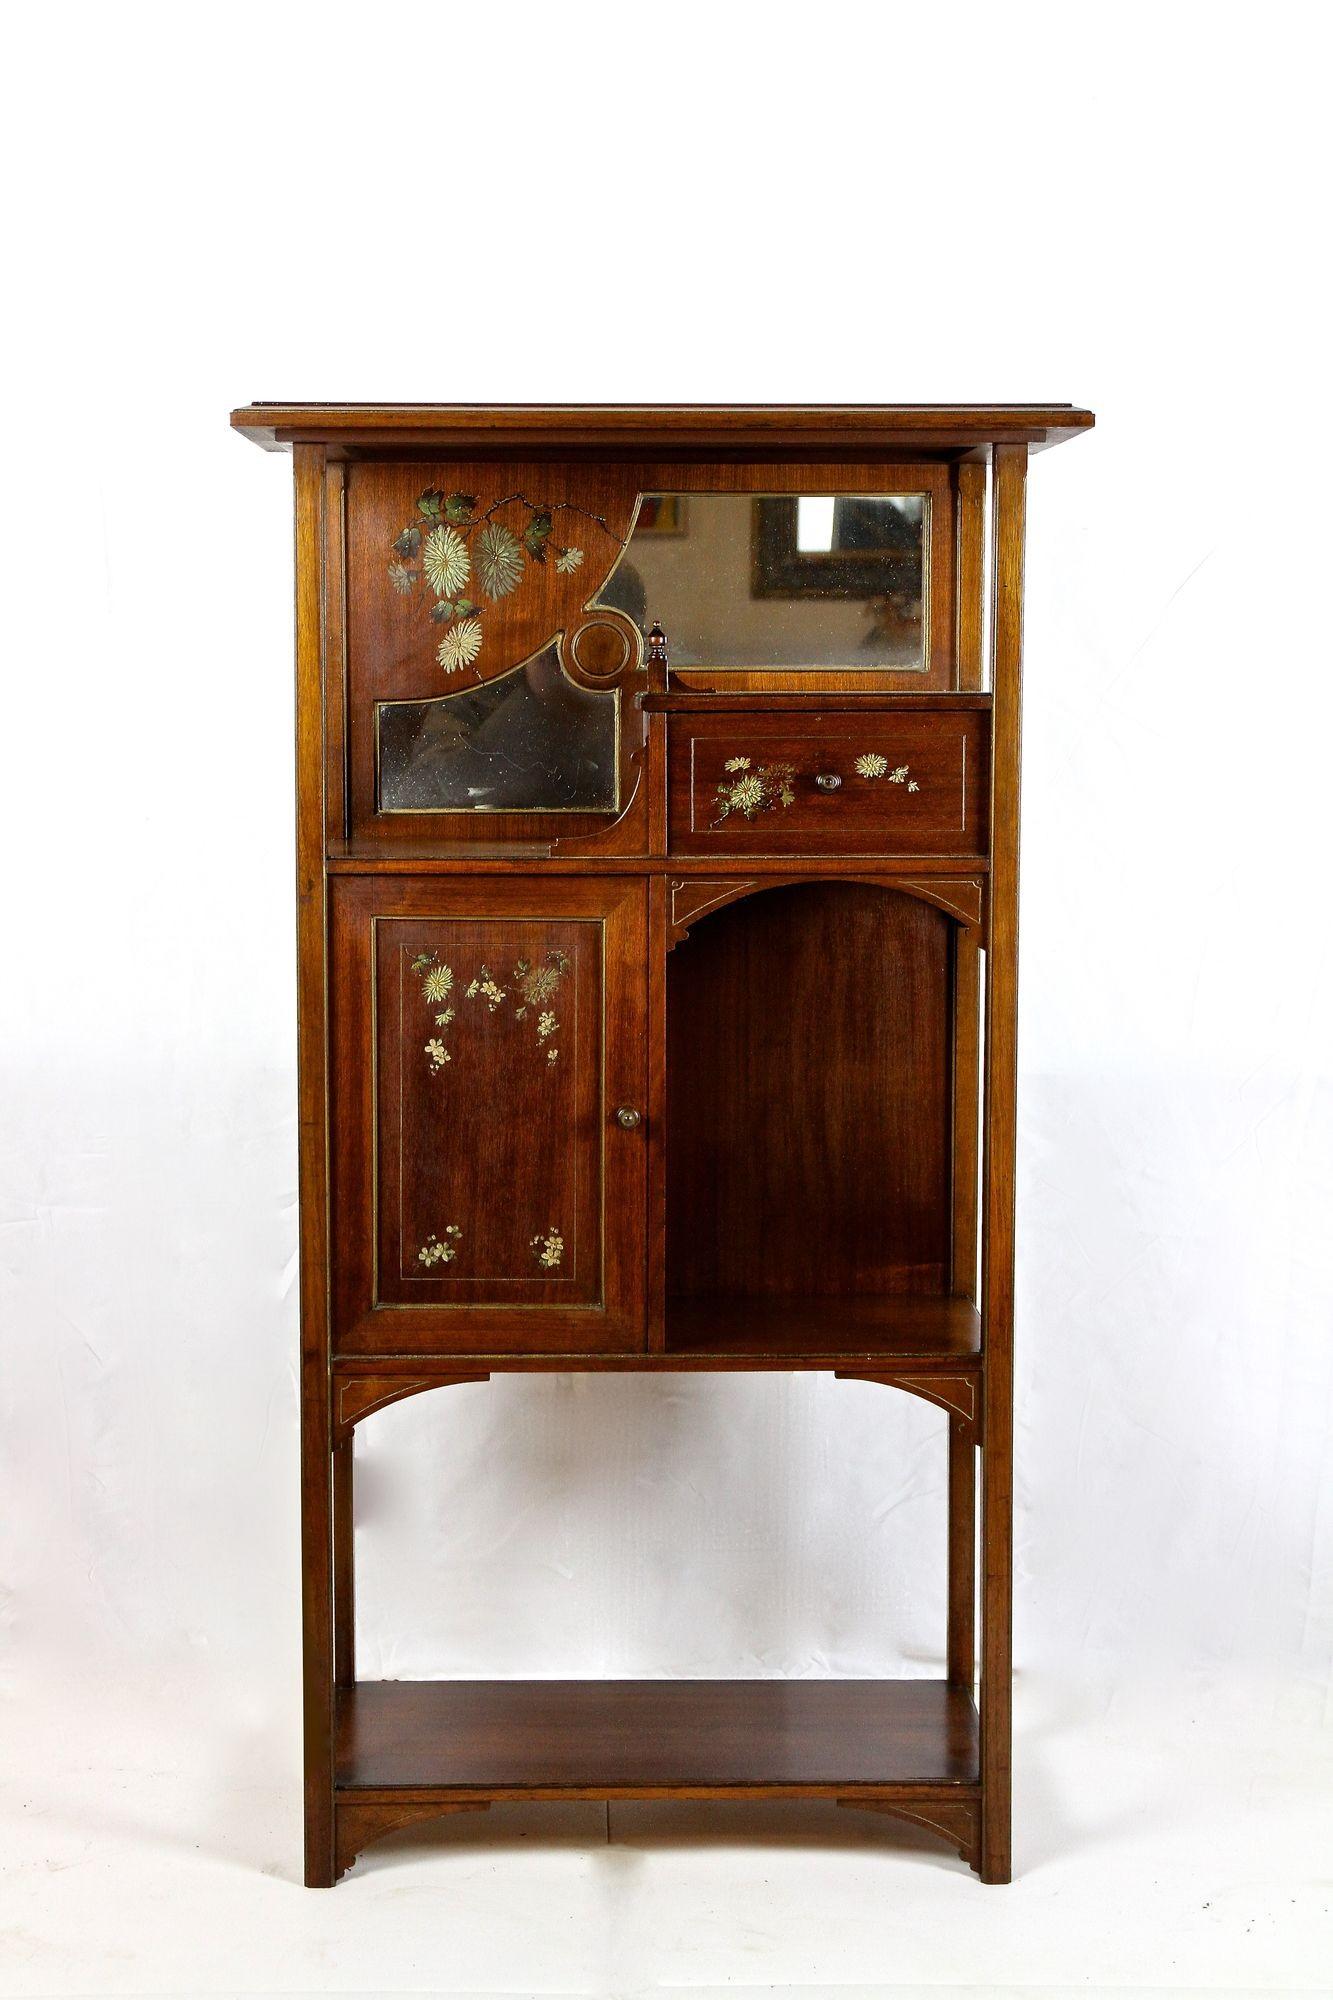 Superb Art Nouveau display cabinet or etagere made out of fine mahogany in France around 1900. The unique, breathtaking design, reflecting the form language of the famous Art Nouveau period at its best, makes this extraordinary antique display